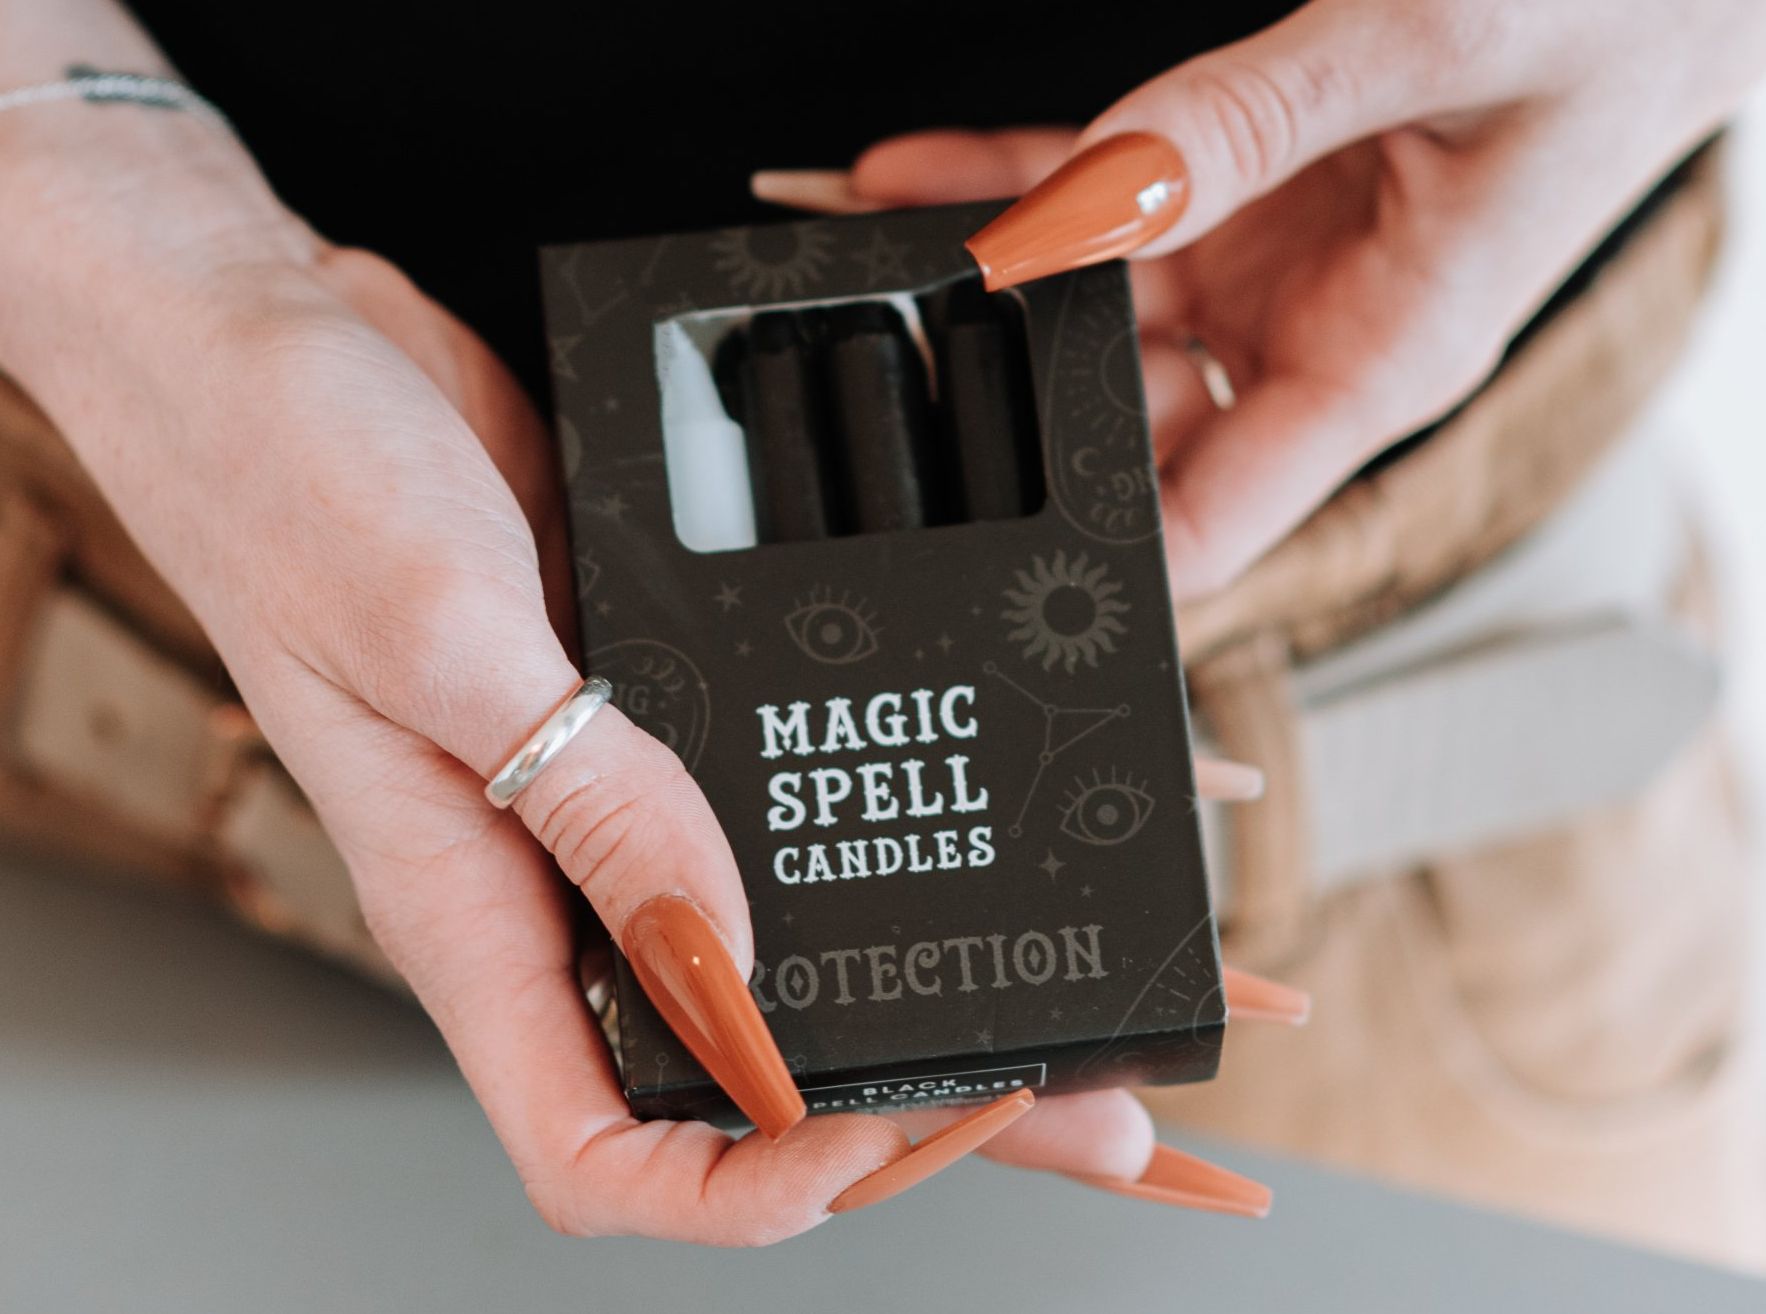 a woman is holding a box of magic spell candles for protection.